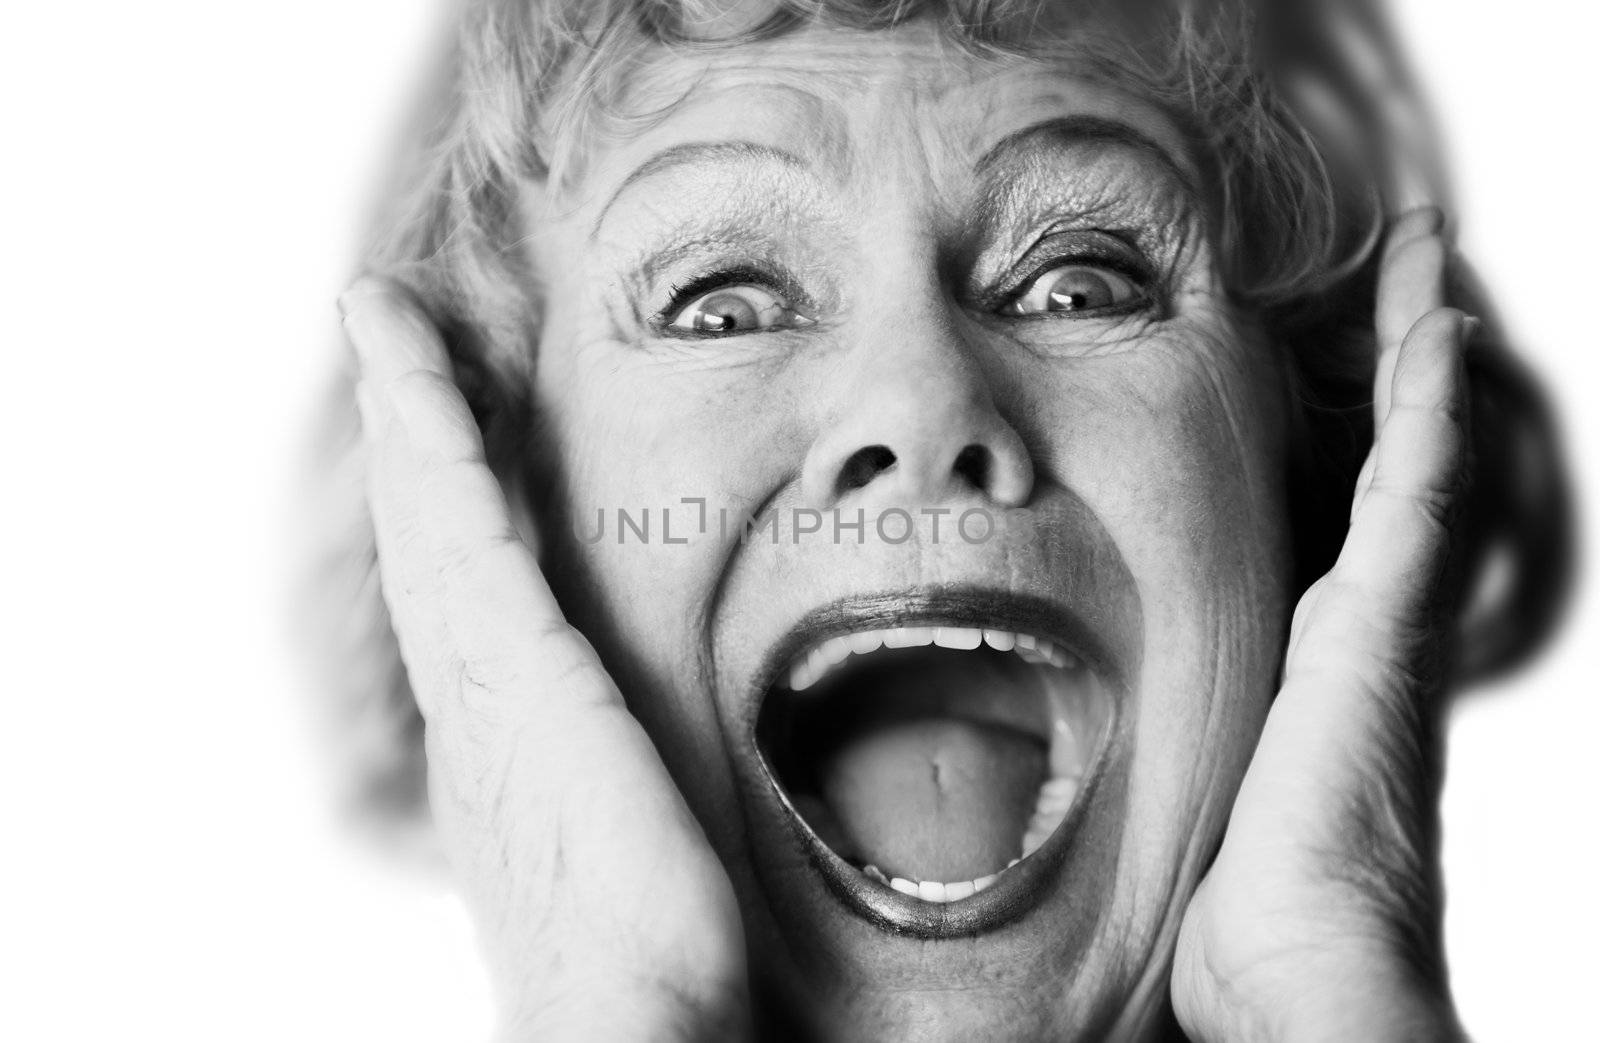 Close-up of a senior woman with her mouth open screaming.